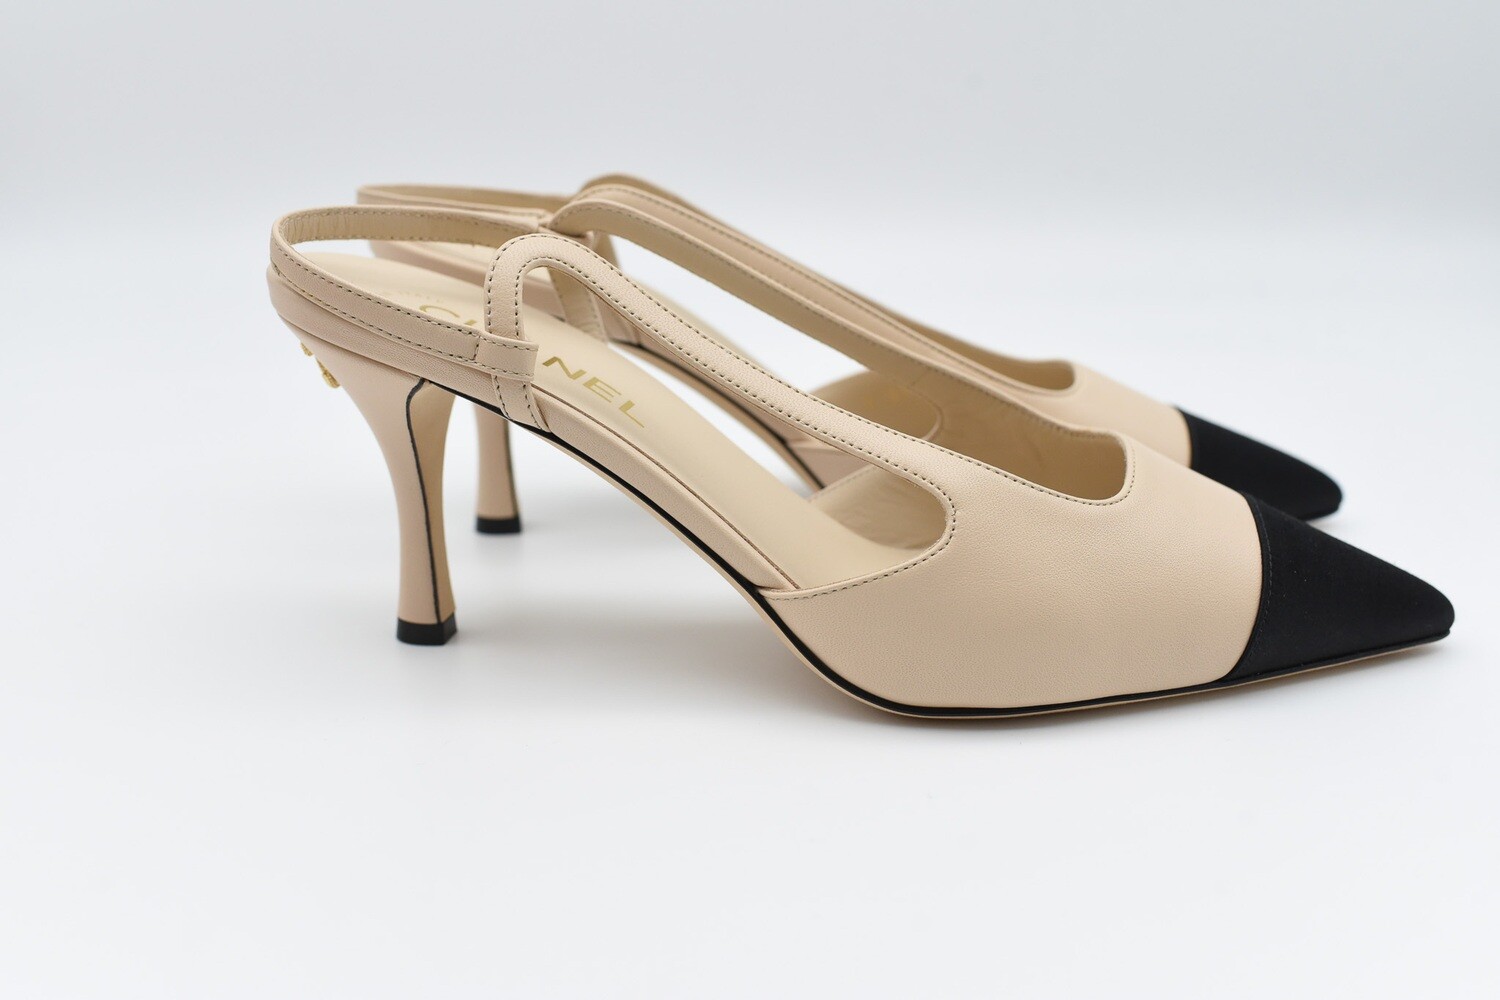 Chanel Shoes Leather Slingbacks, Beige and Black, Size 40, New in Box GA006